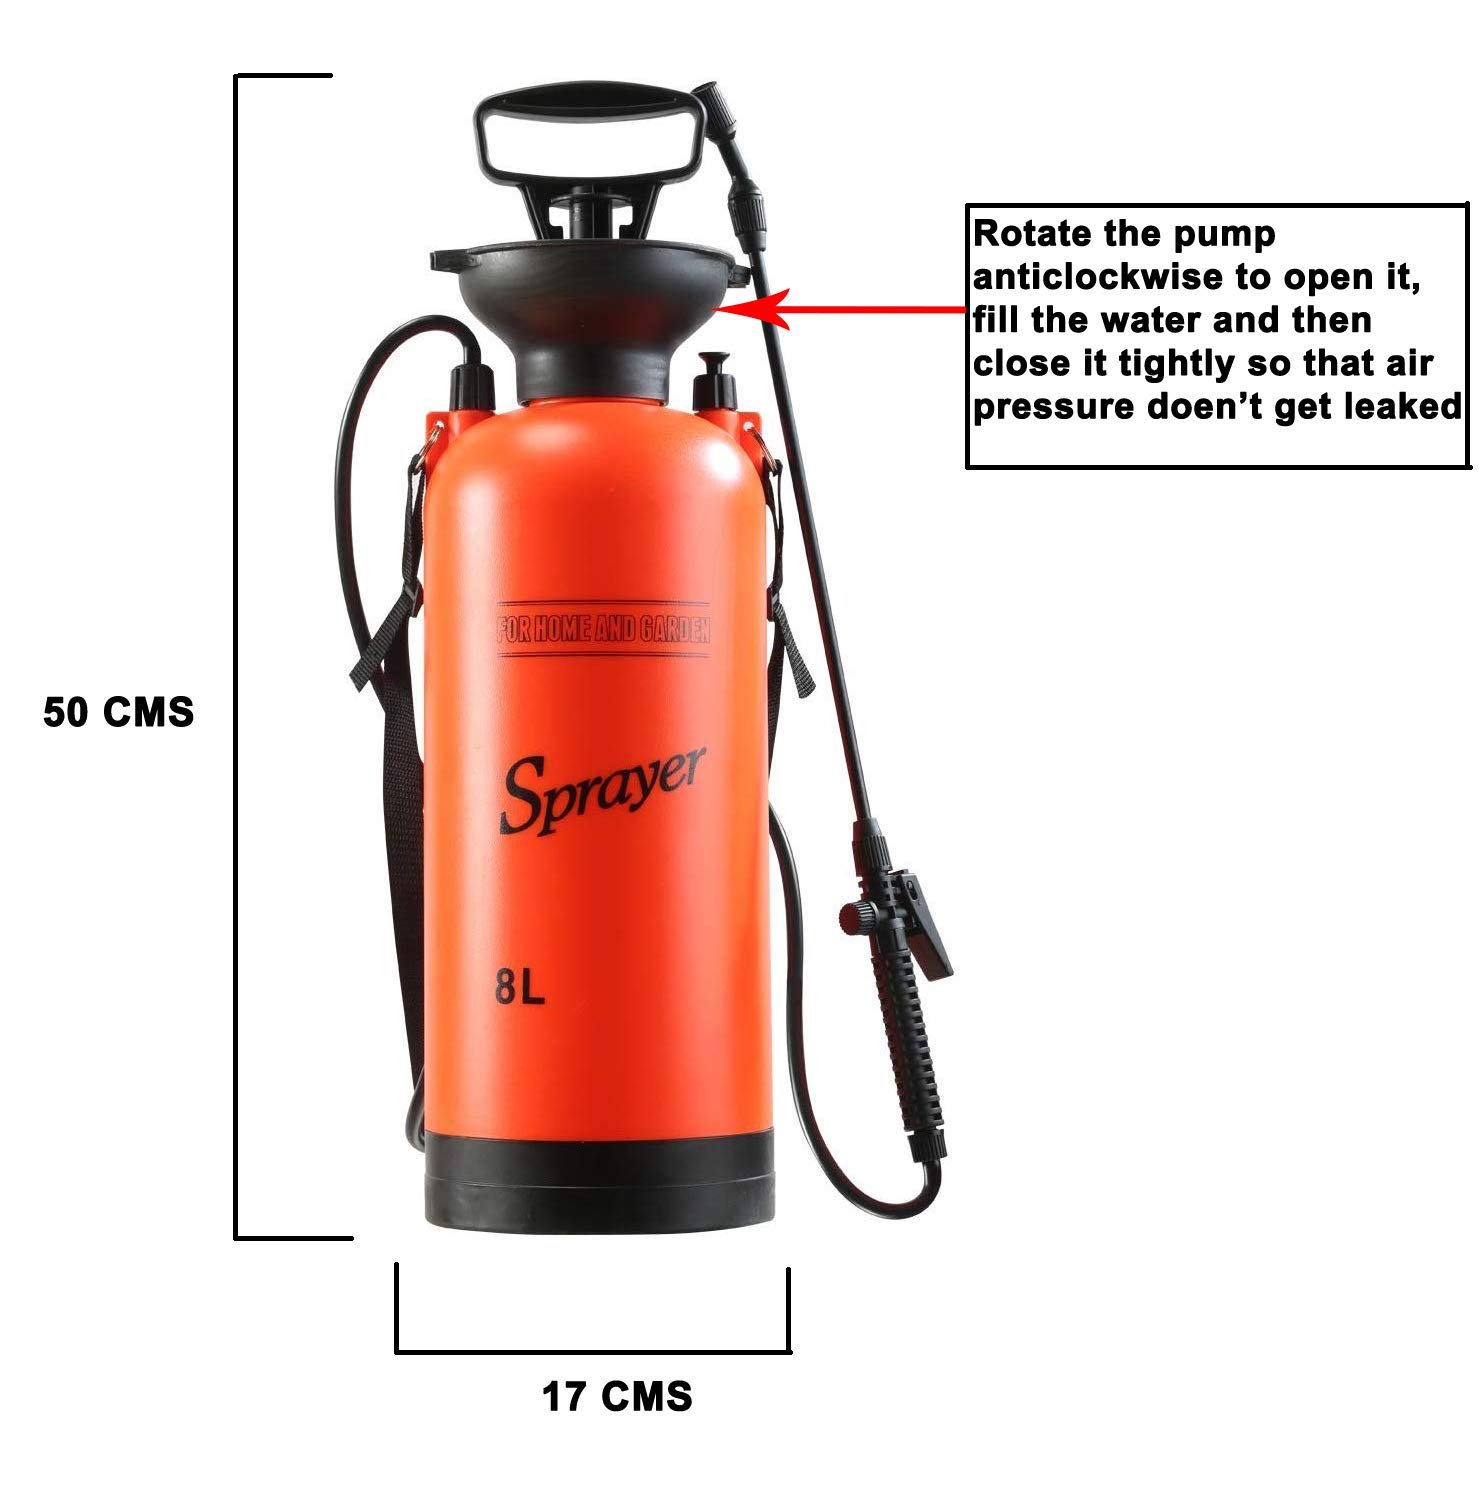 kesri 8 l manual sprayer/garden pressure sprayer with adjustable nozzle for mist and continuous spray (red)